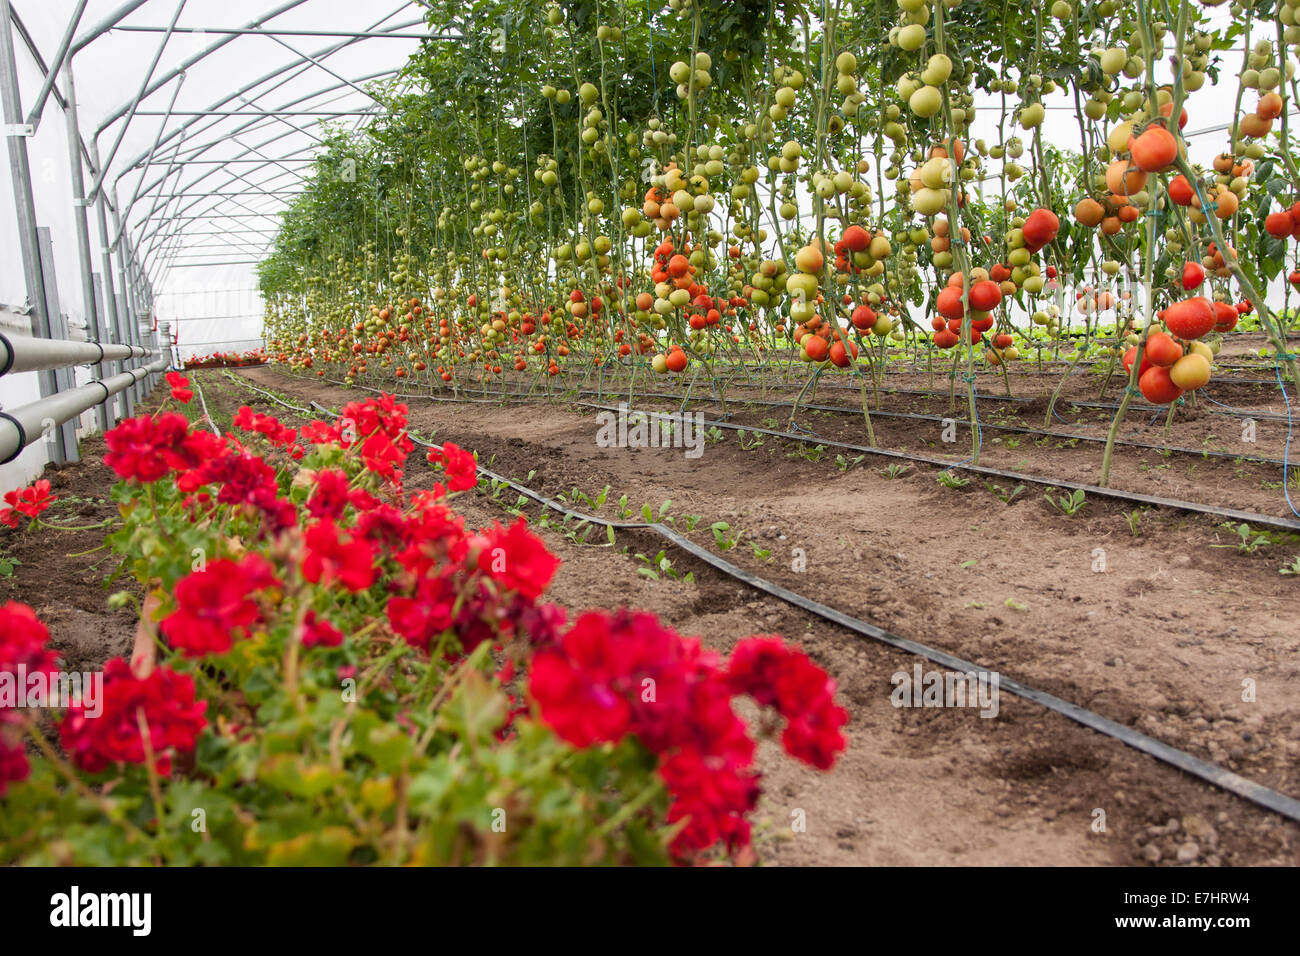 A lot of red tomatoes in a greenhouse Stock Photo